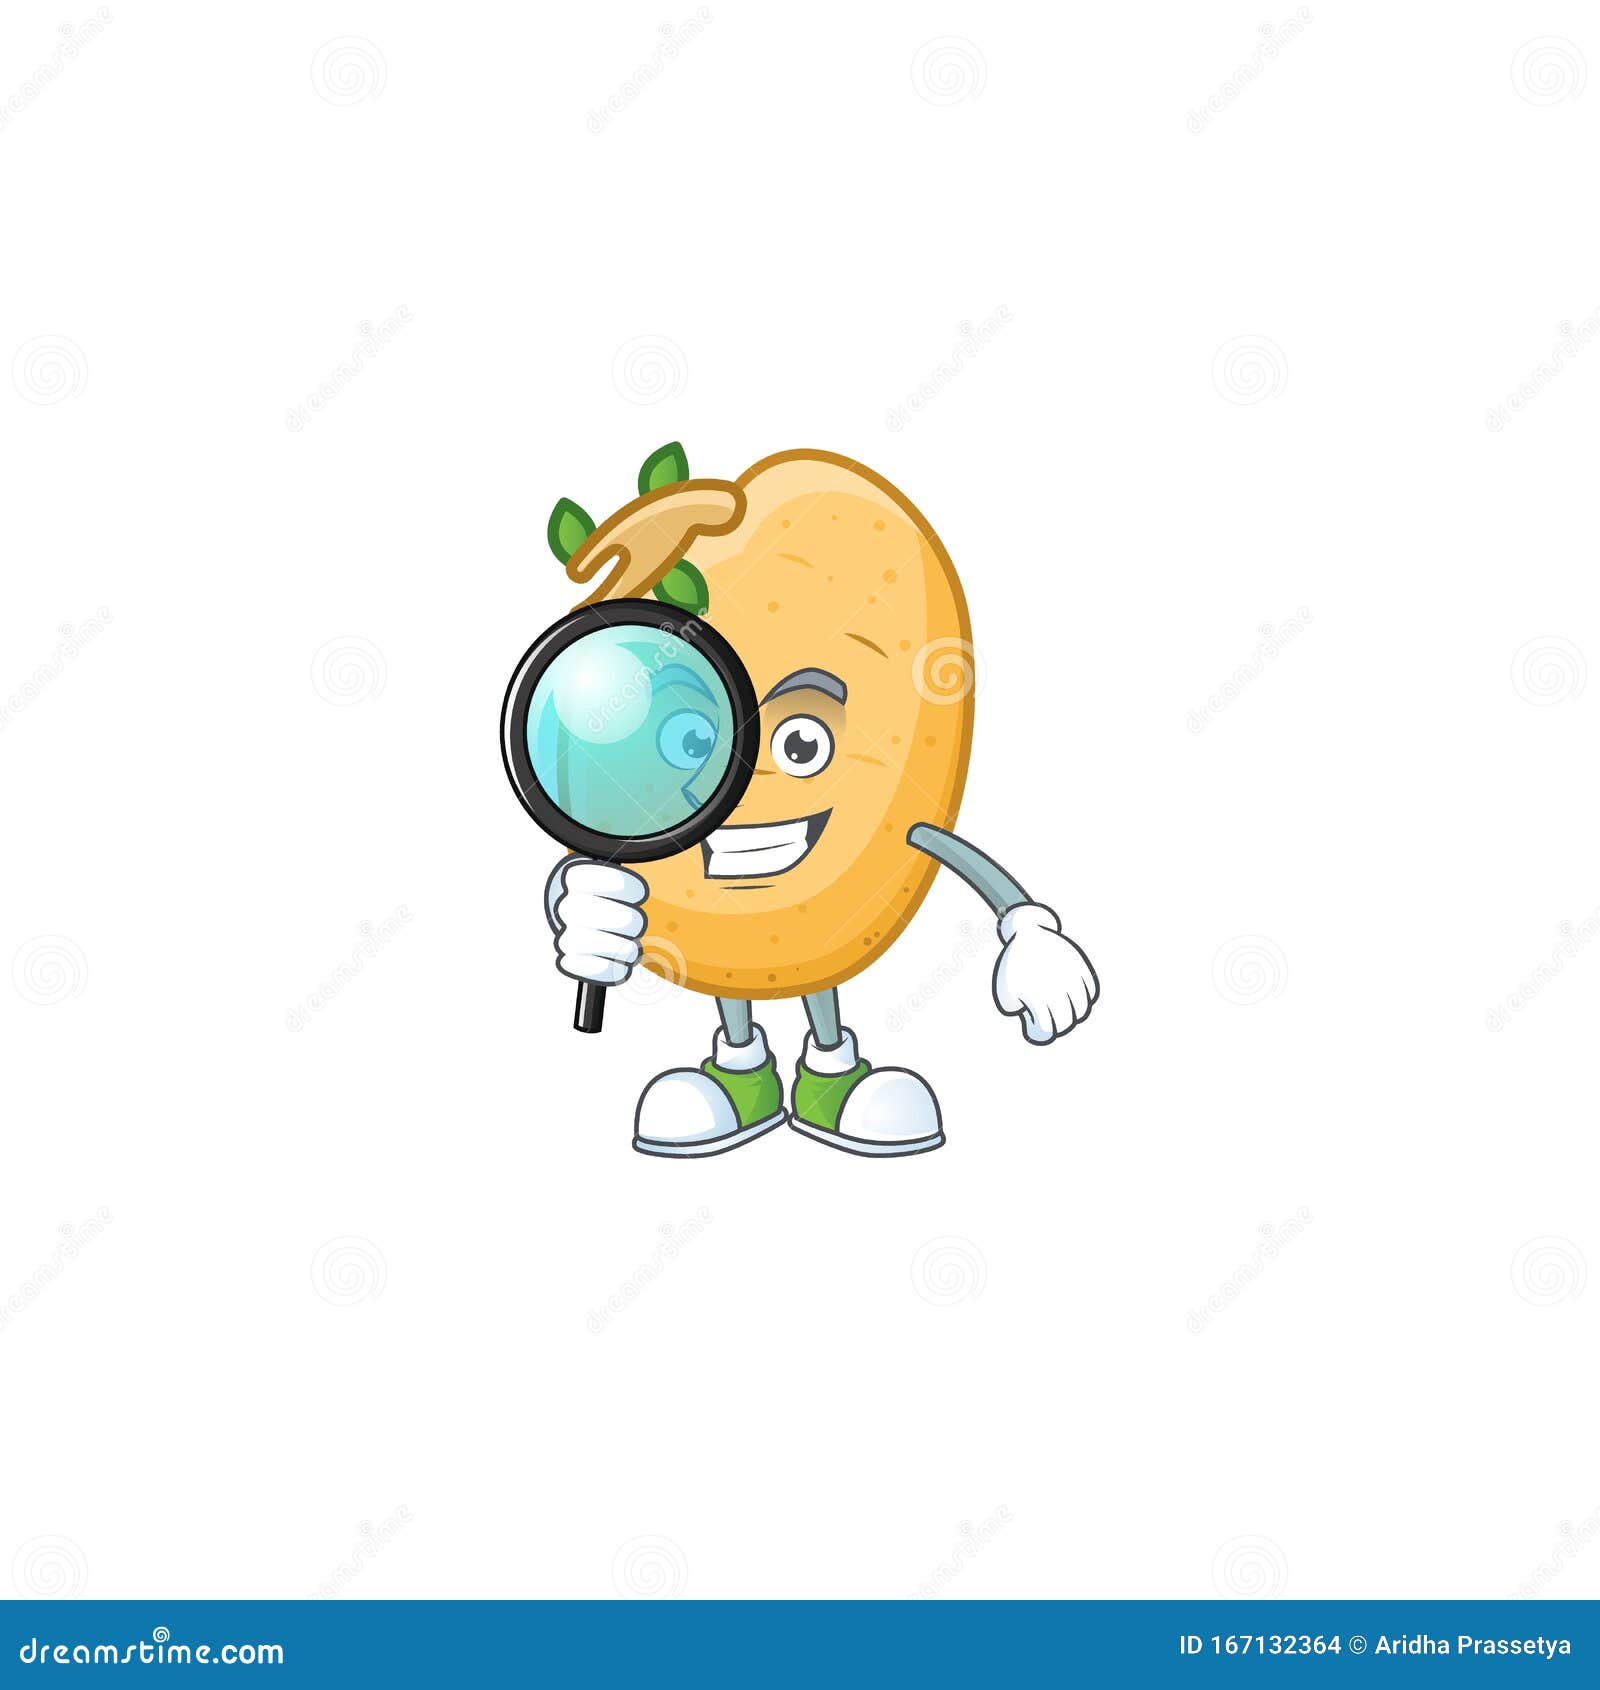 Smart One Eye Sprouted Potato Tuber Detective Cartoon Character Design  Stock Vector - Illustration of police, organic: 167132364